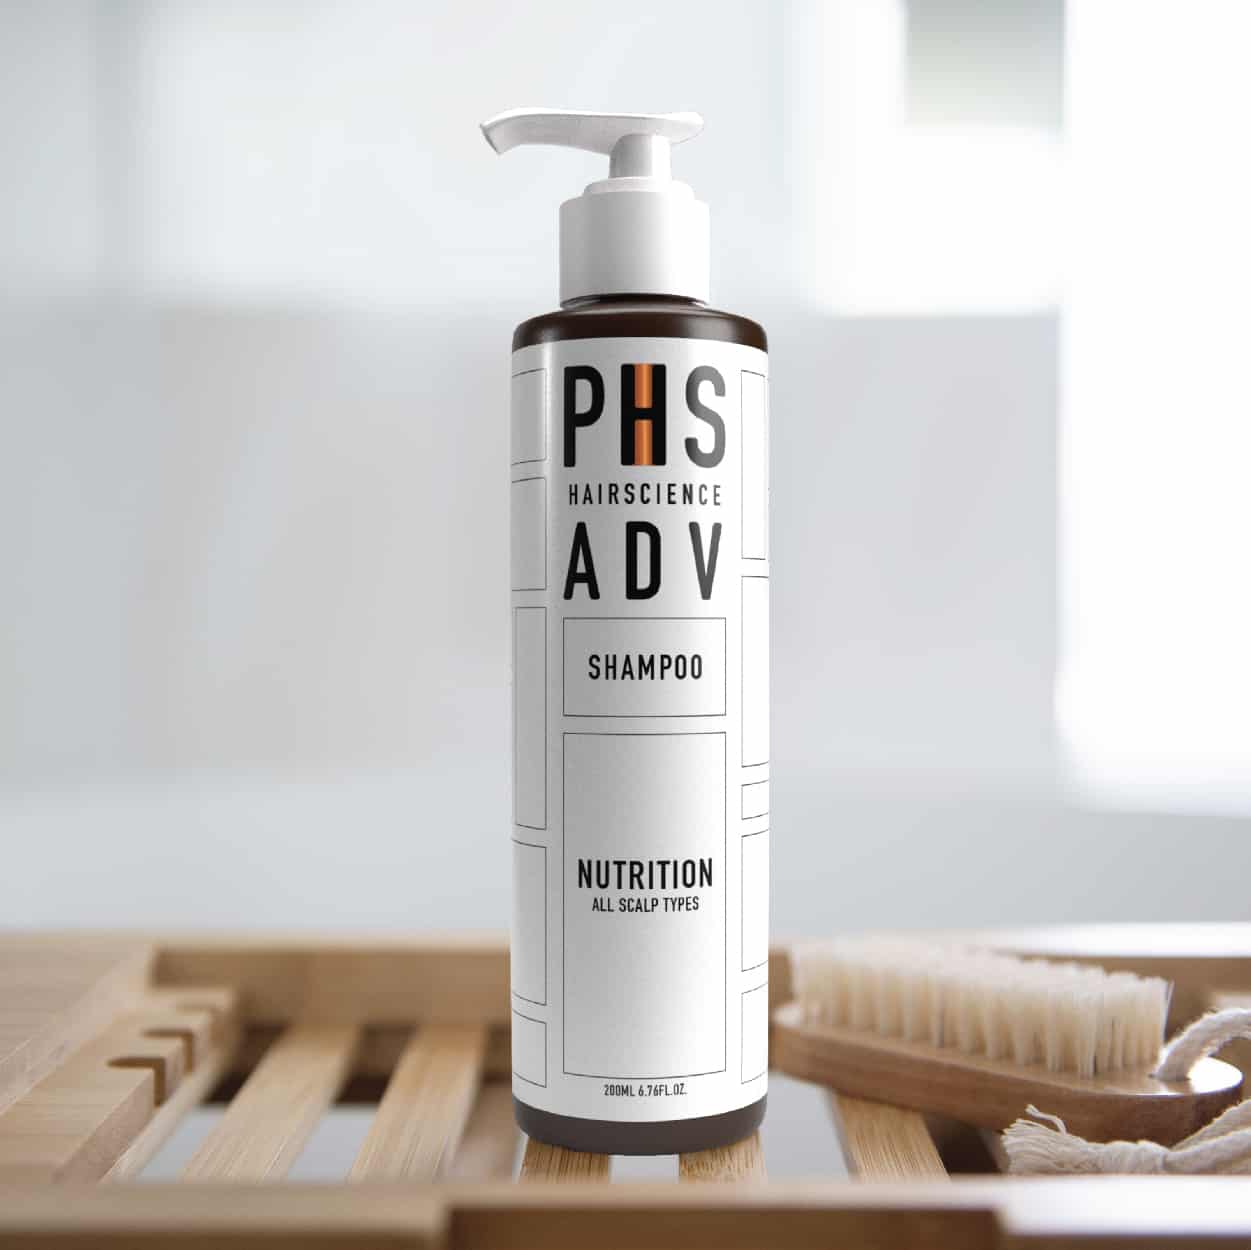 phs hairscience shampoo for all scalp types